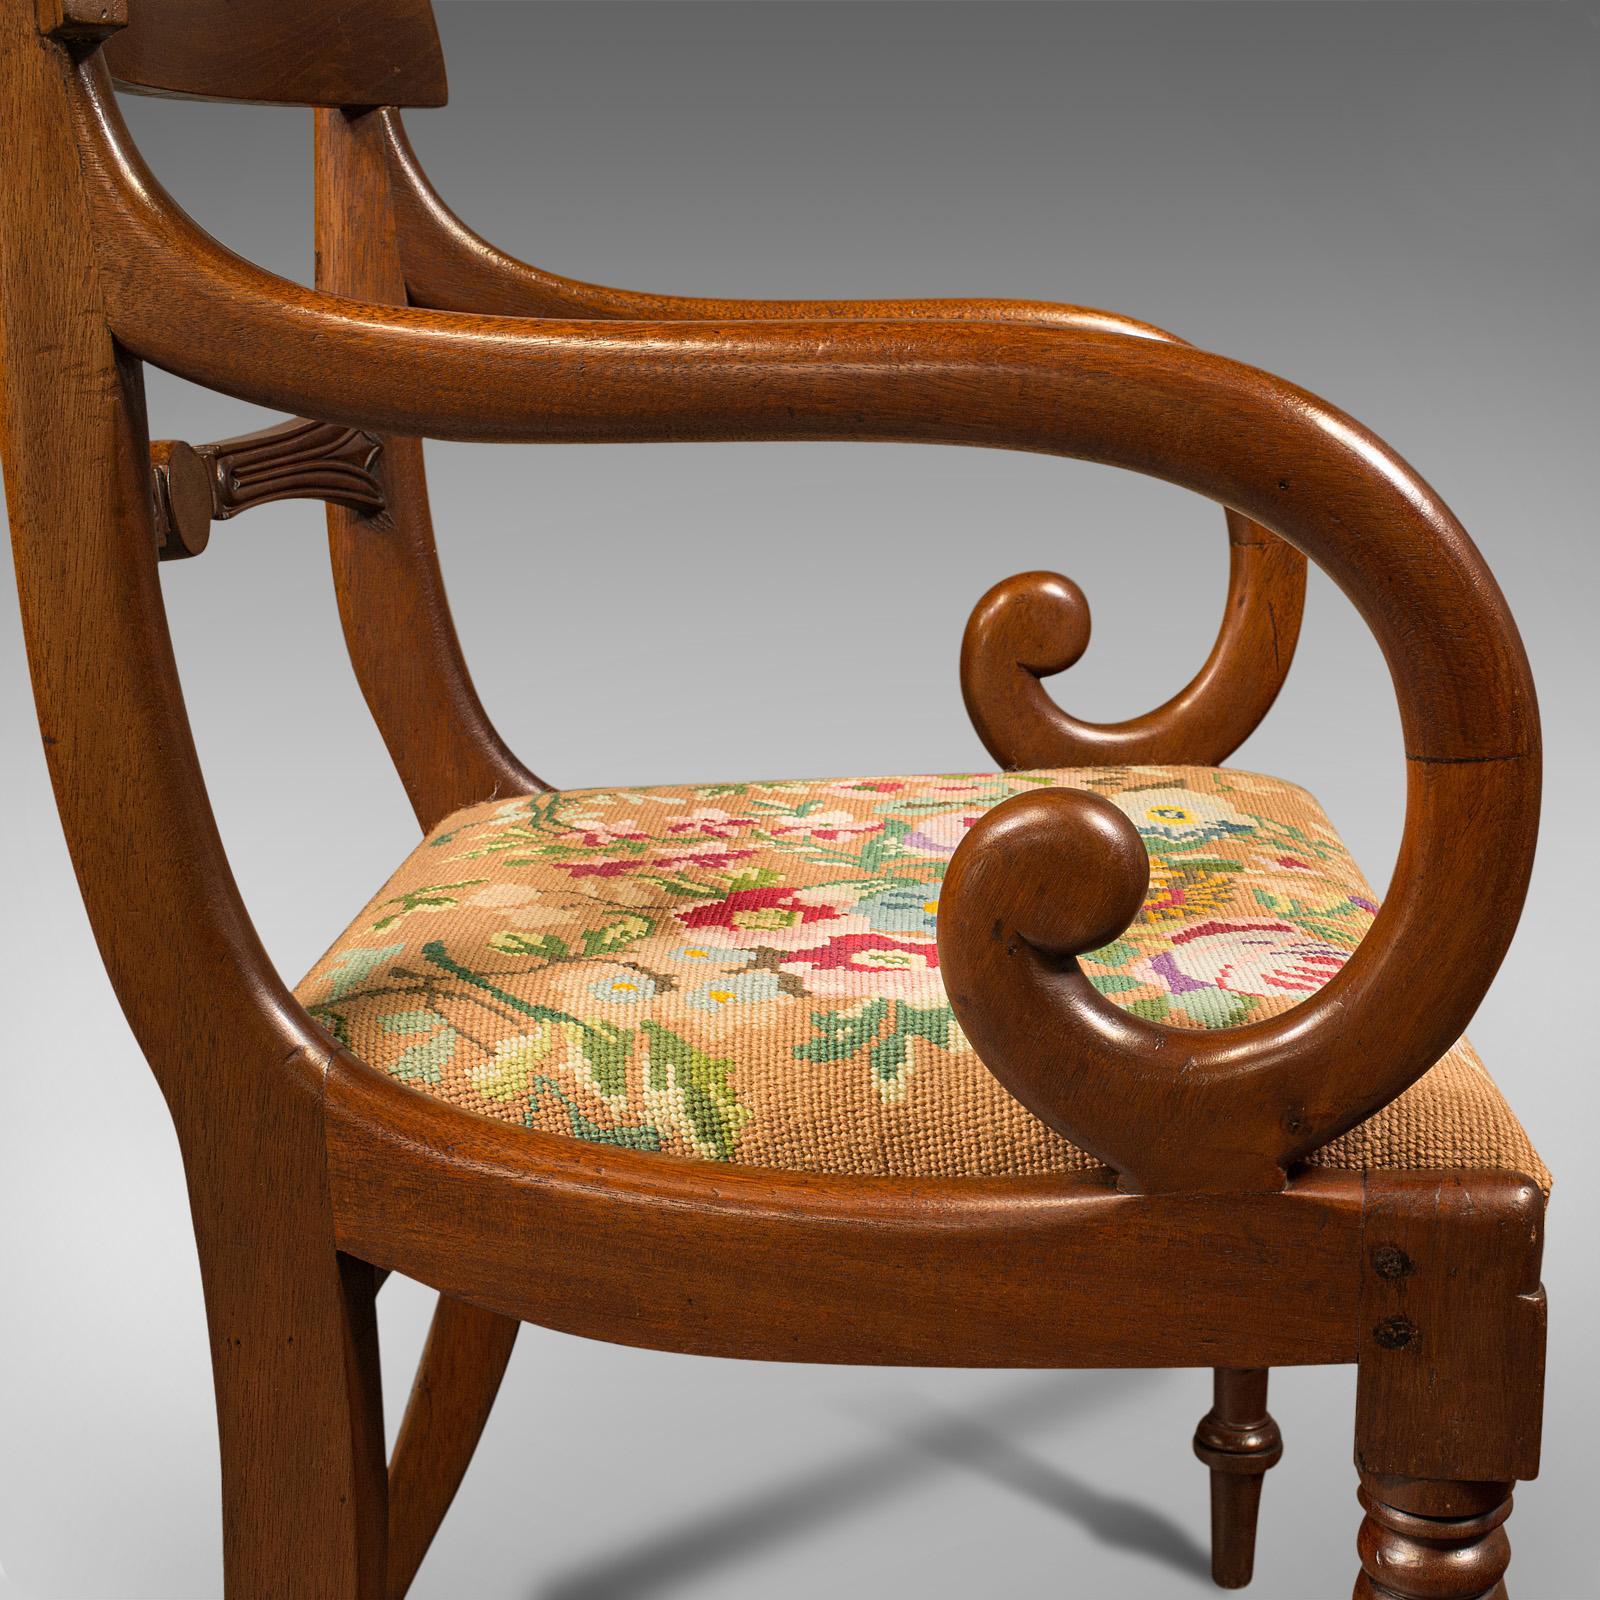 Antique Scroll Arm Chair, English, Armchair, Desk, Needlepoint, Regency, C.1830 For Sale 4